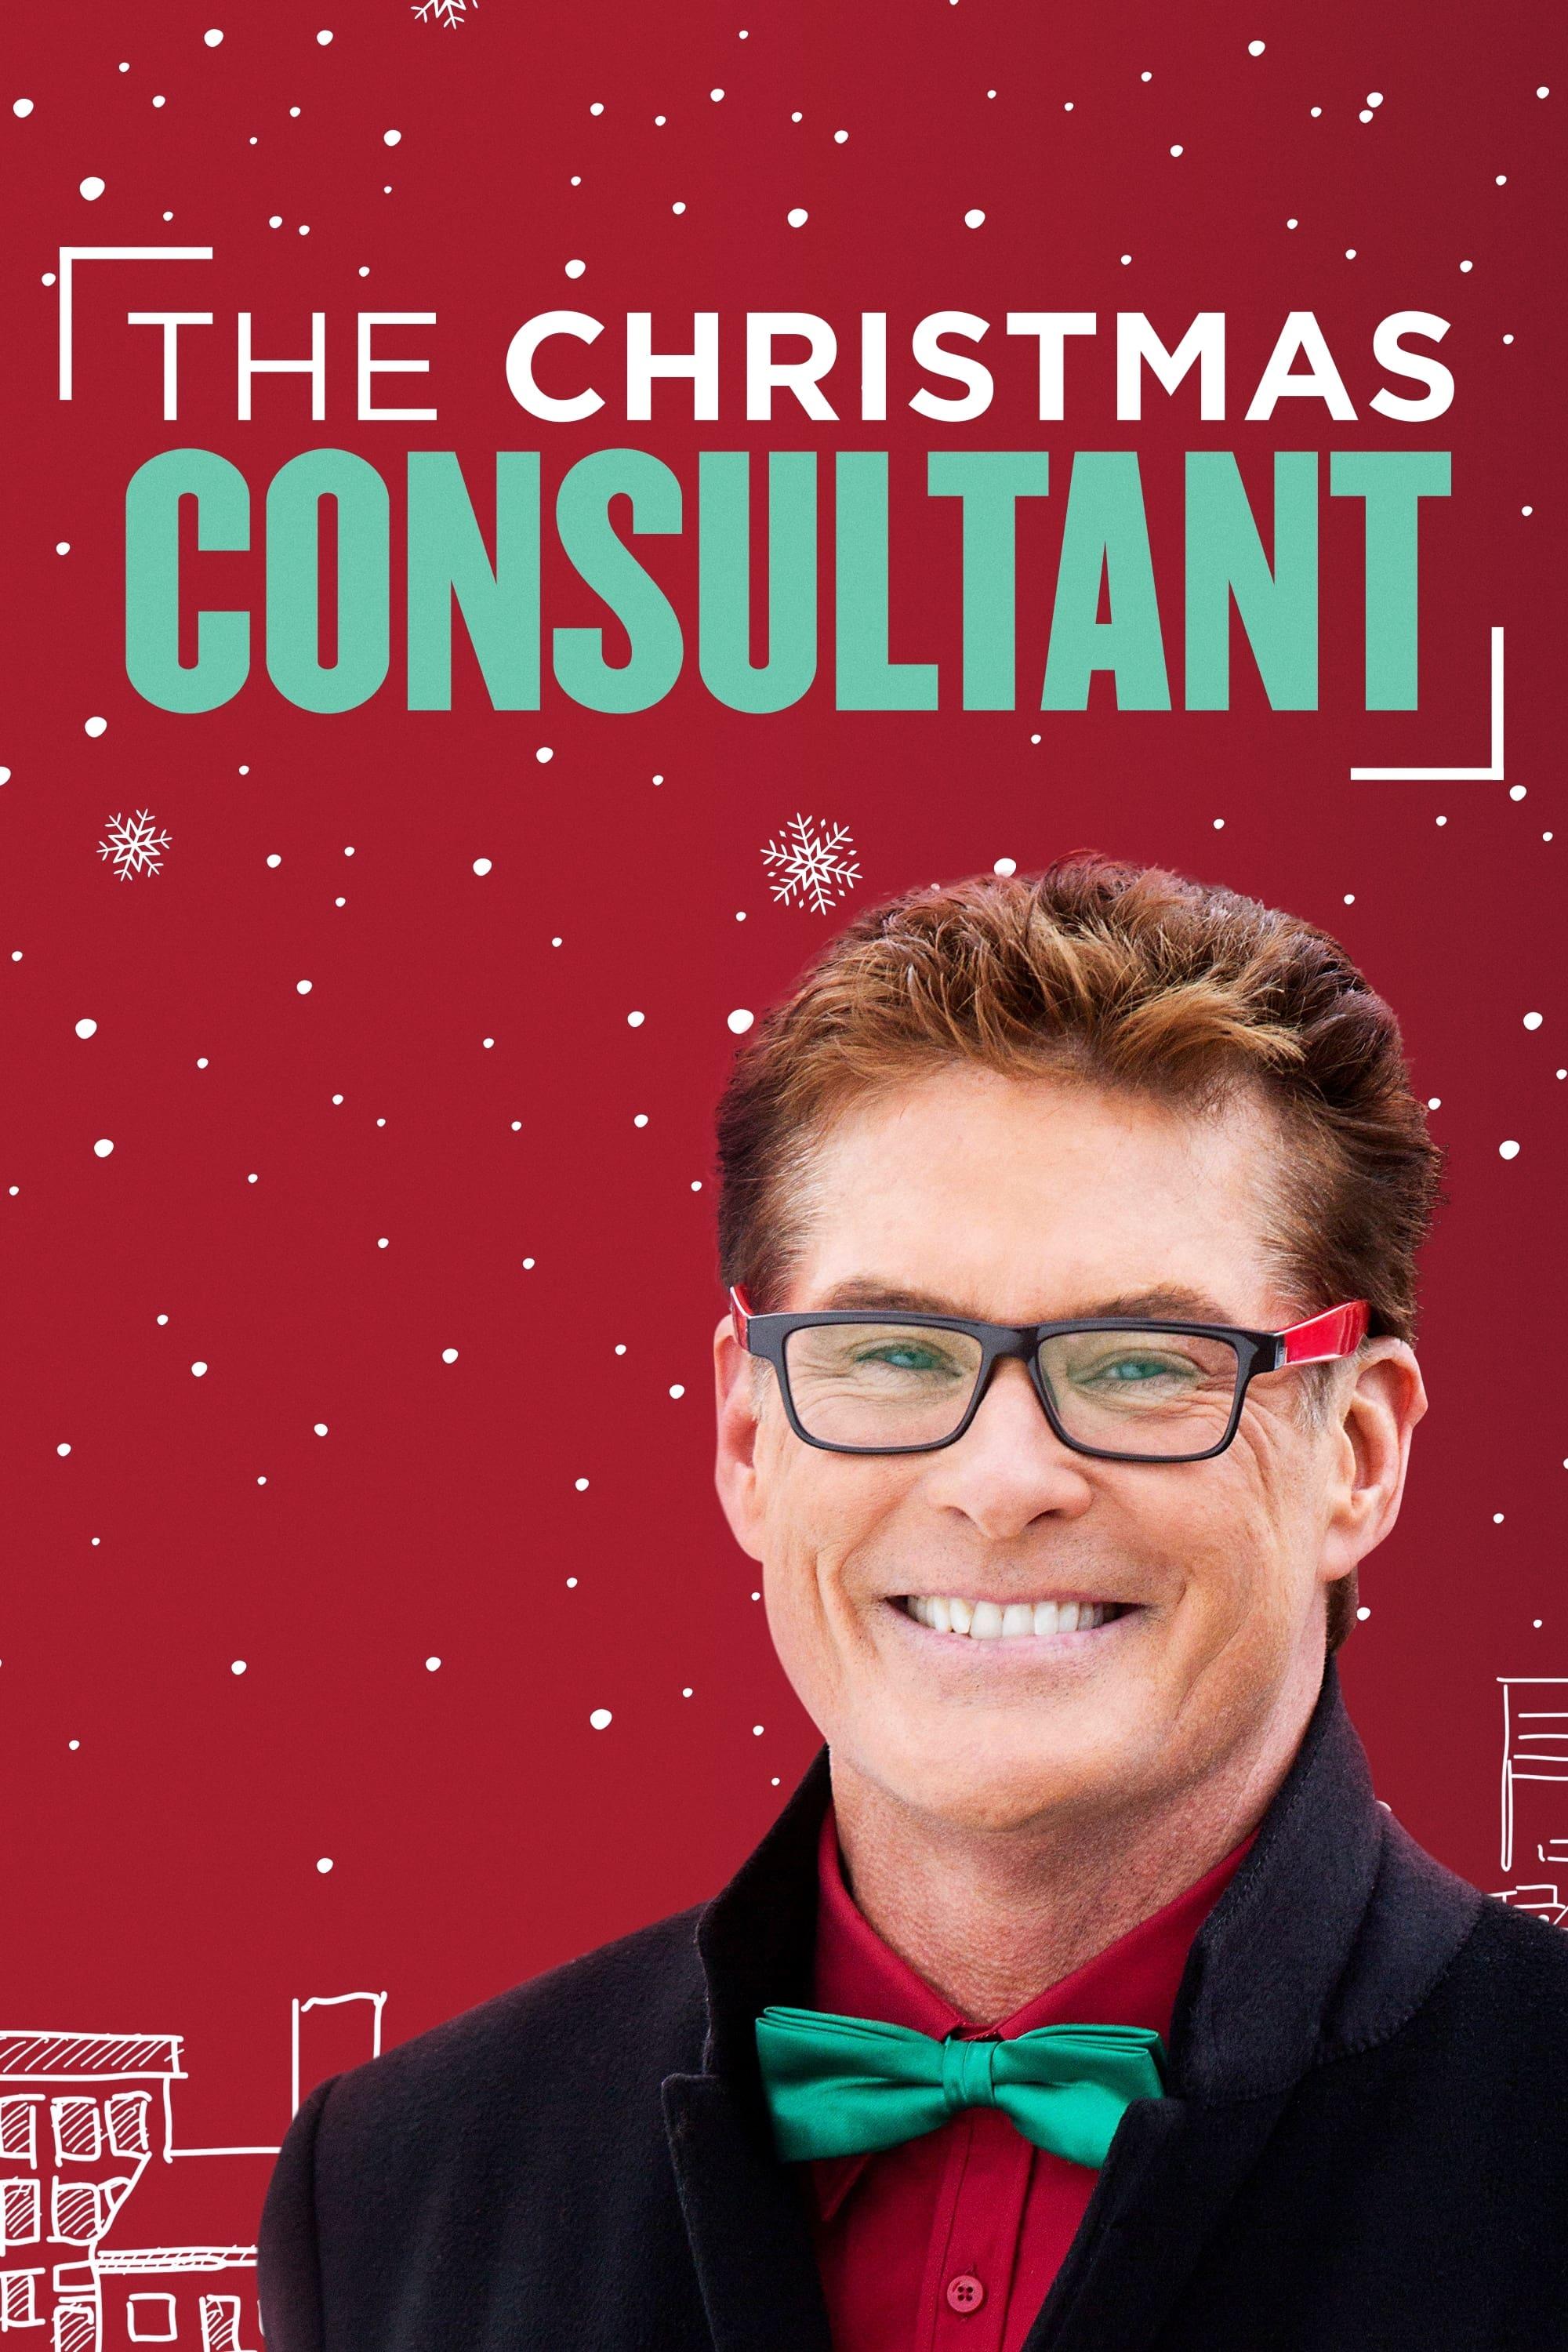 The Christmas Consultant poster